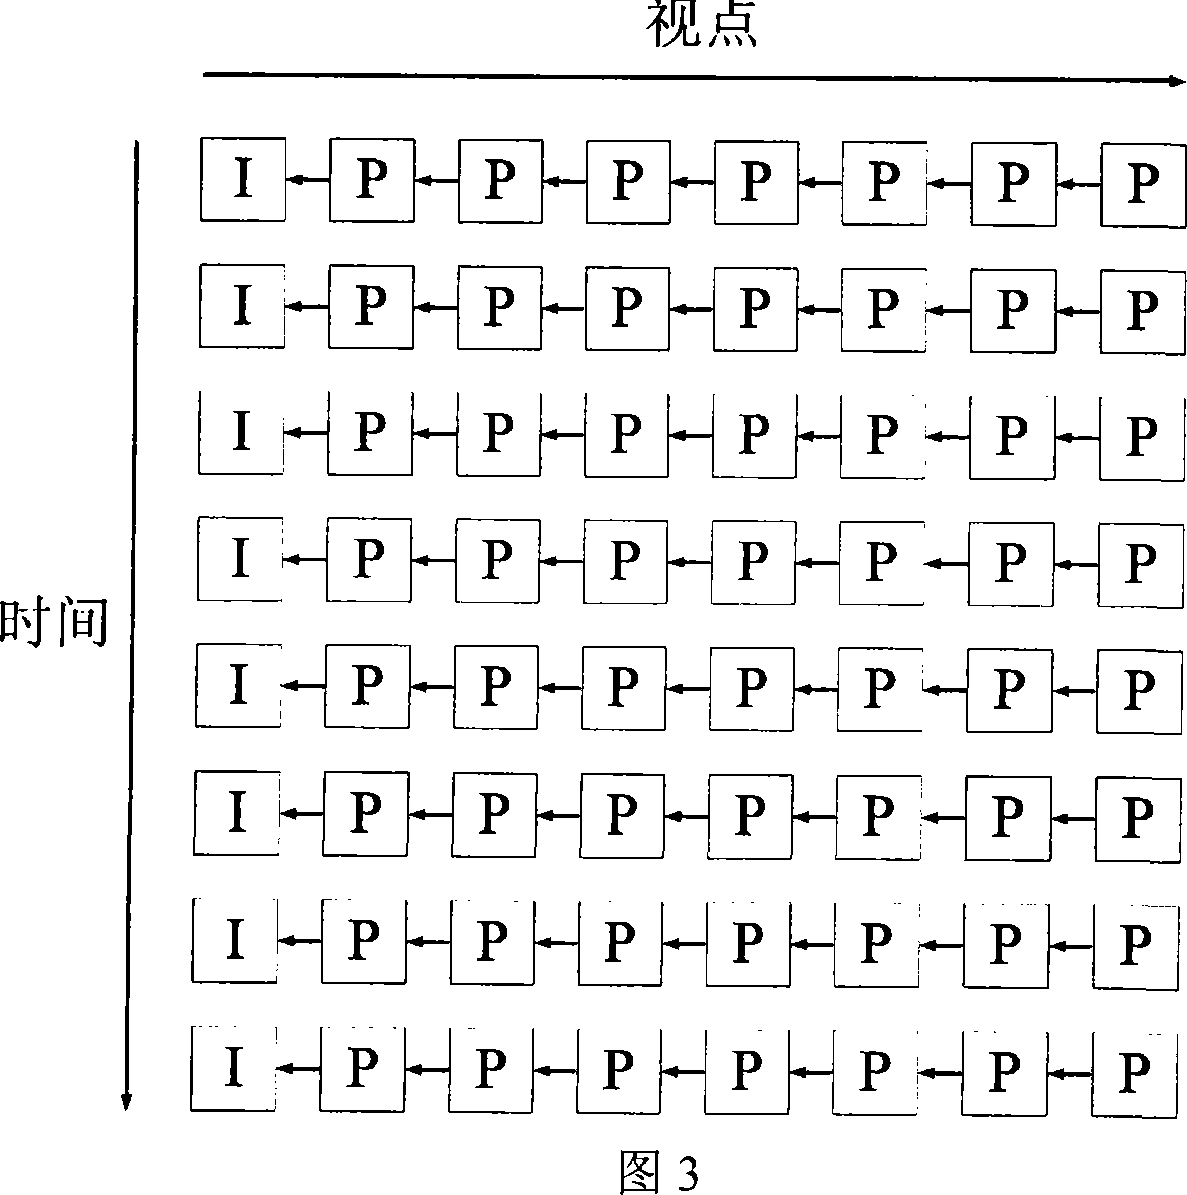 Preprocessing method of multi-viewpoint image